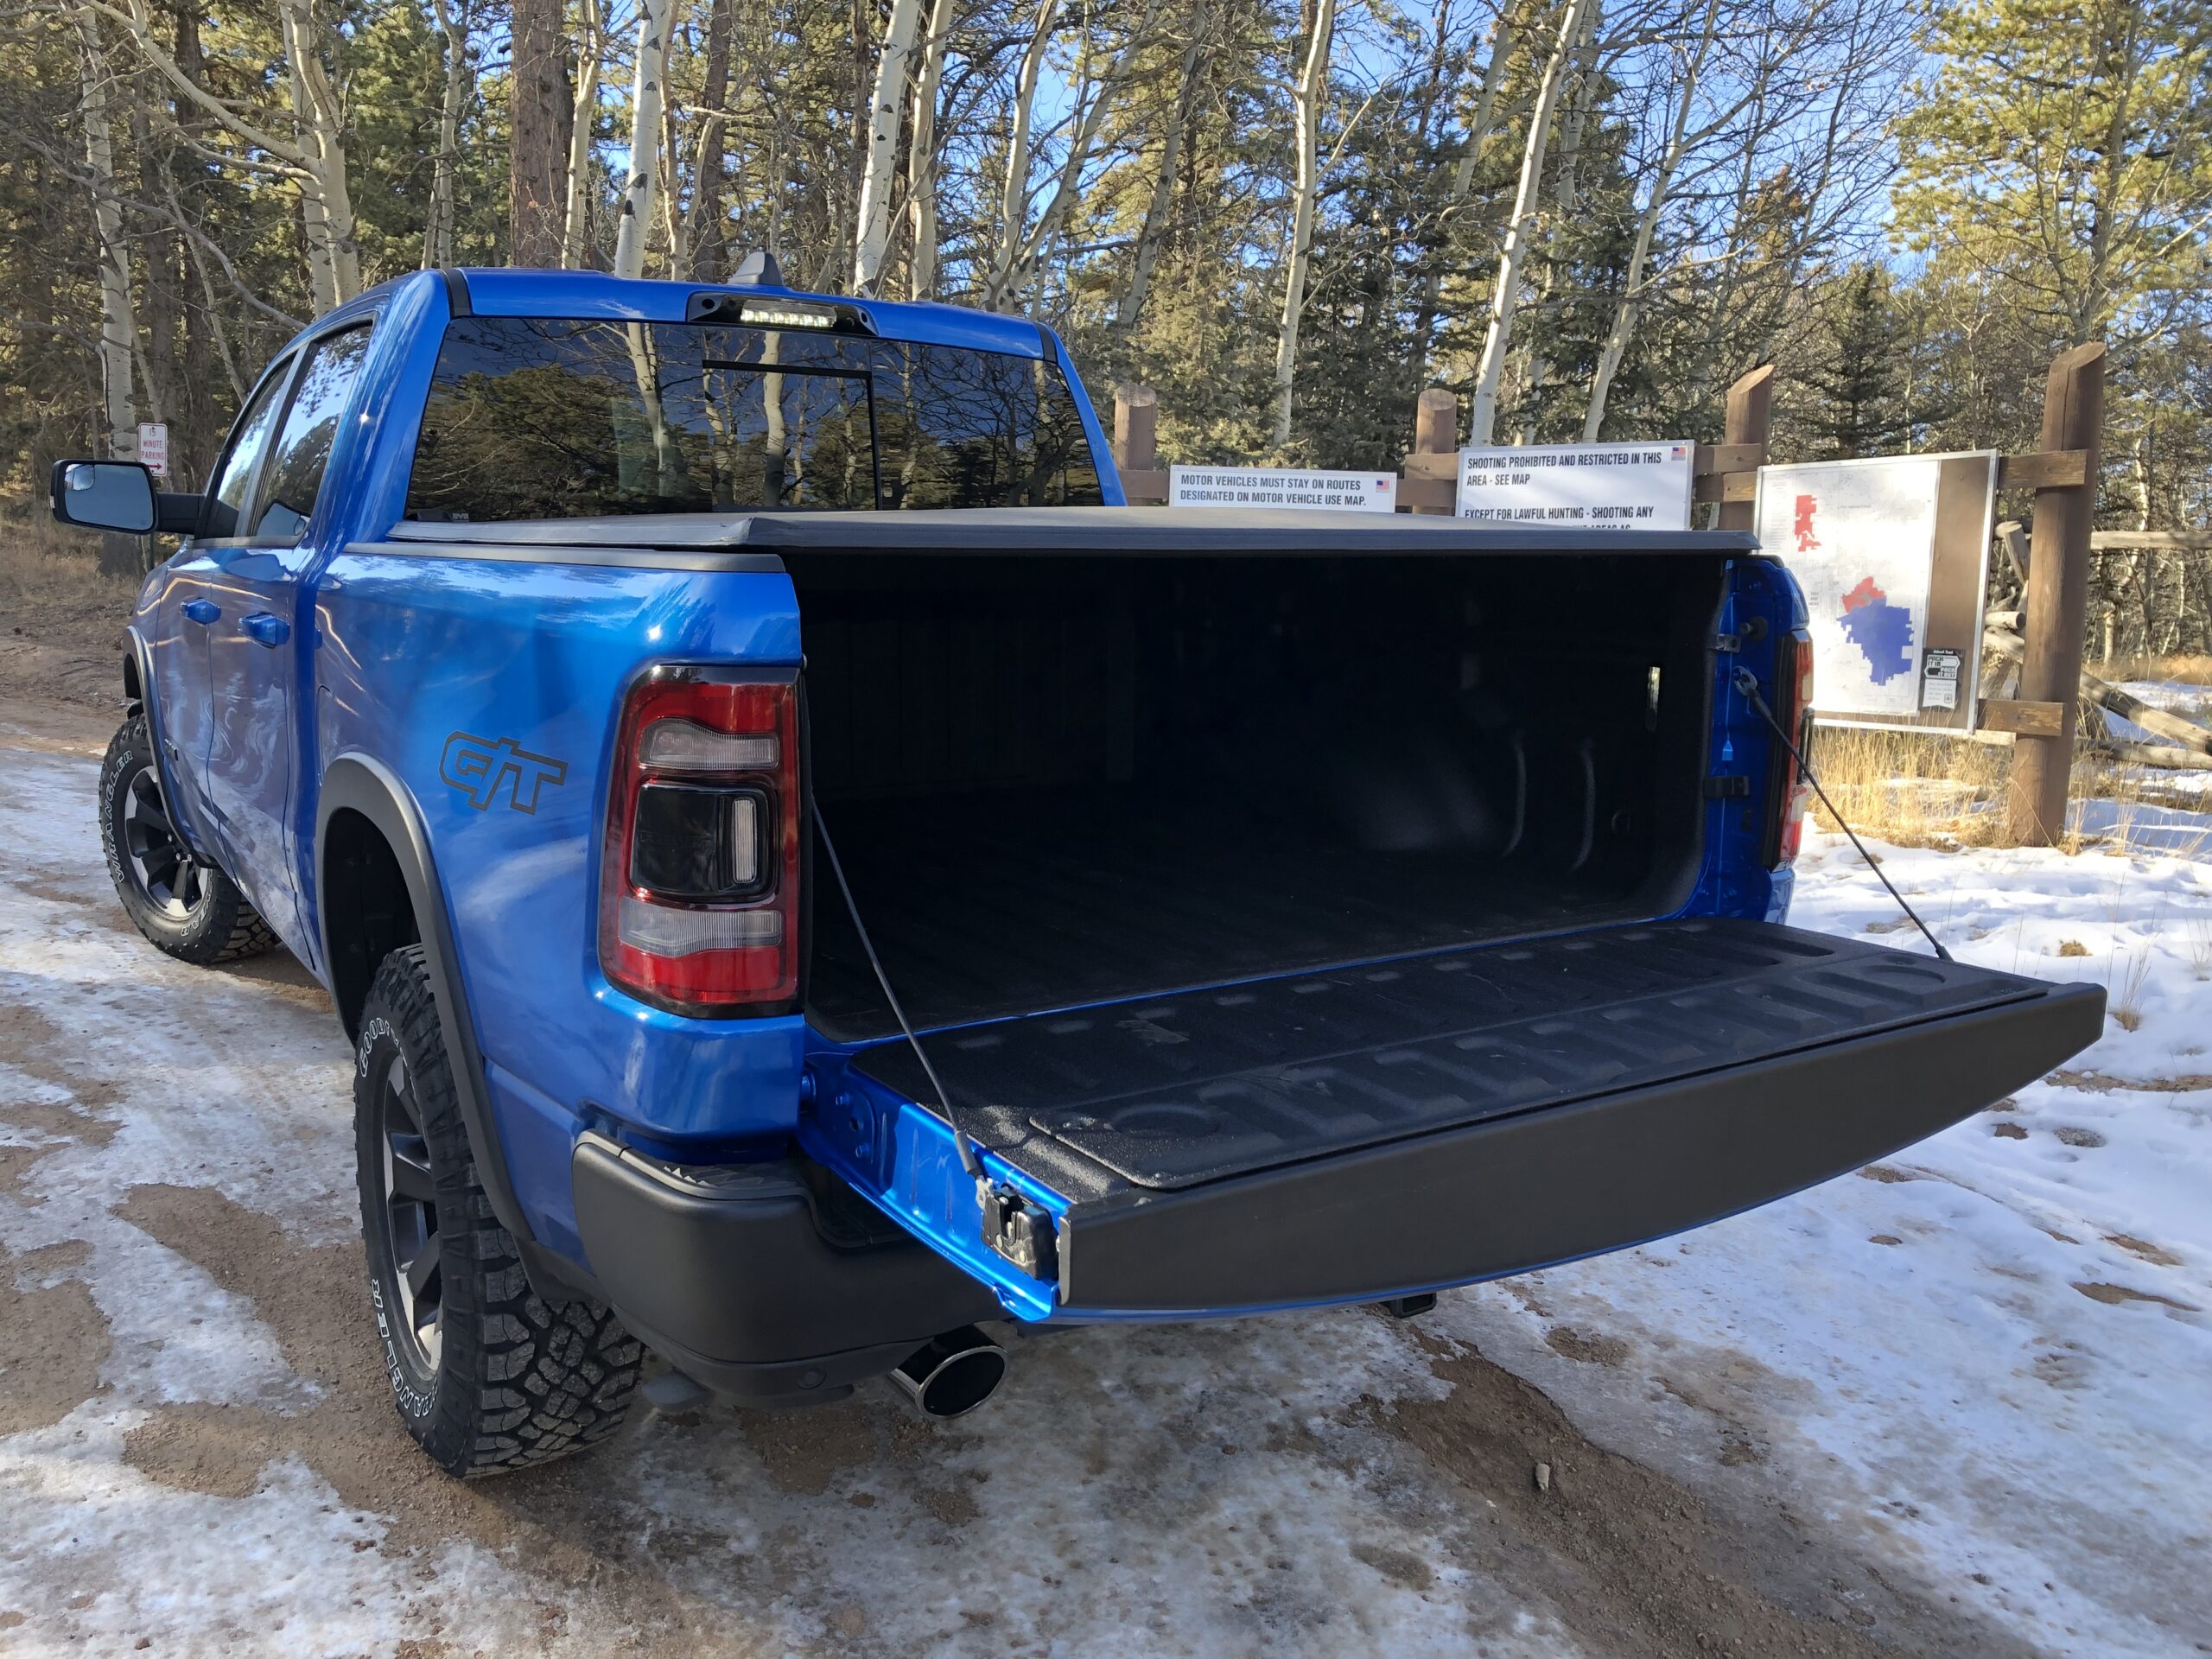 Consider the multi-functional tailgate and side storage.